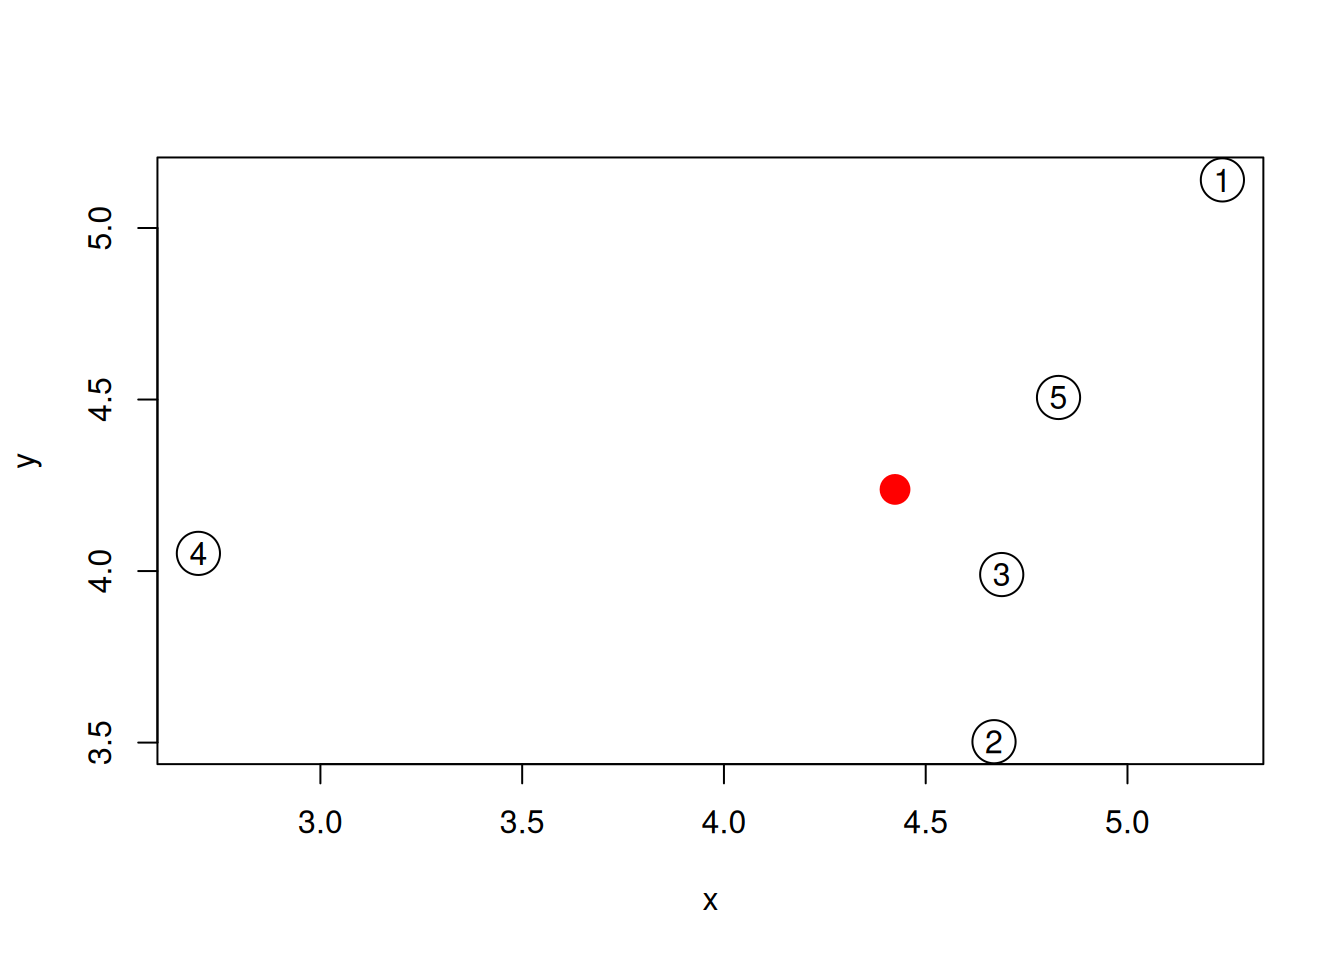 The average sample is shown as a red point among the 5 samples simulated above.